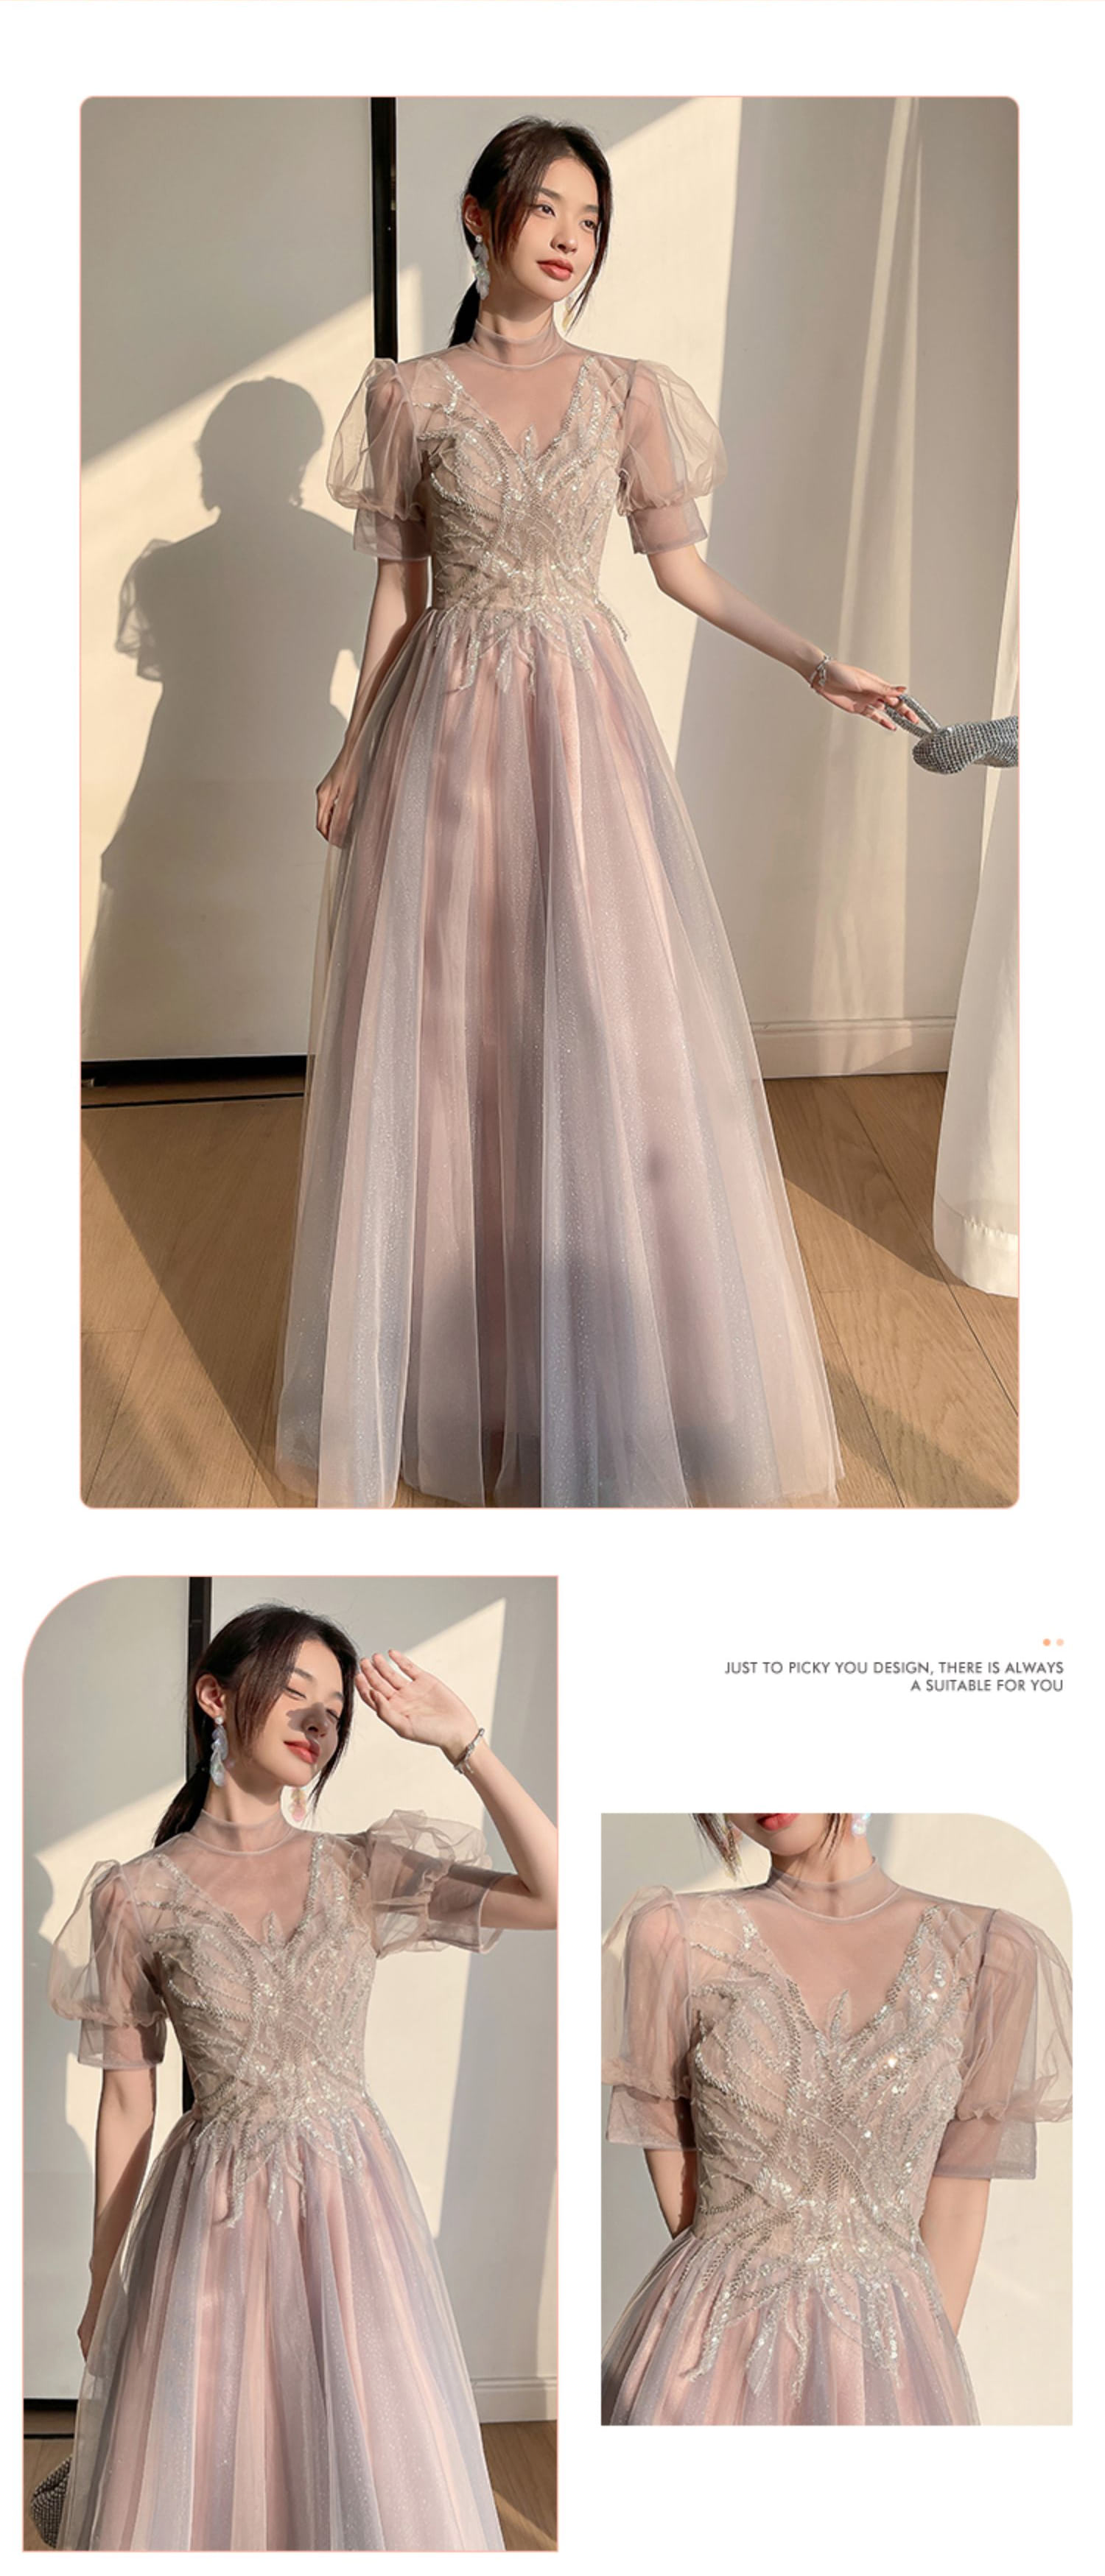 Elegant-Pale-Pink-Maxi-Bridesmaid-Dress-Long-Party-Ball-Gown21